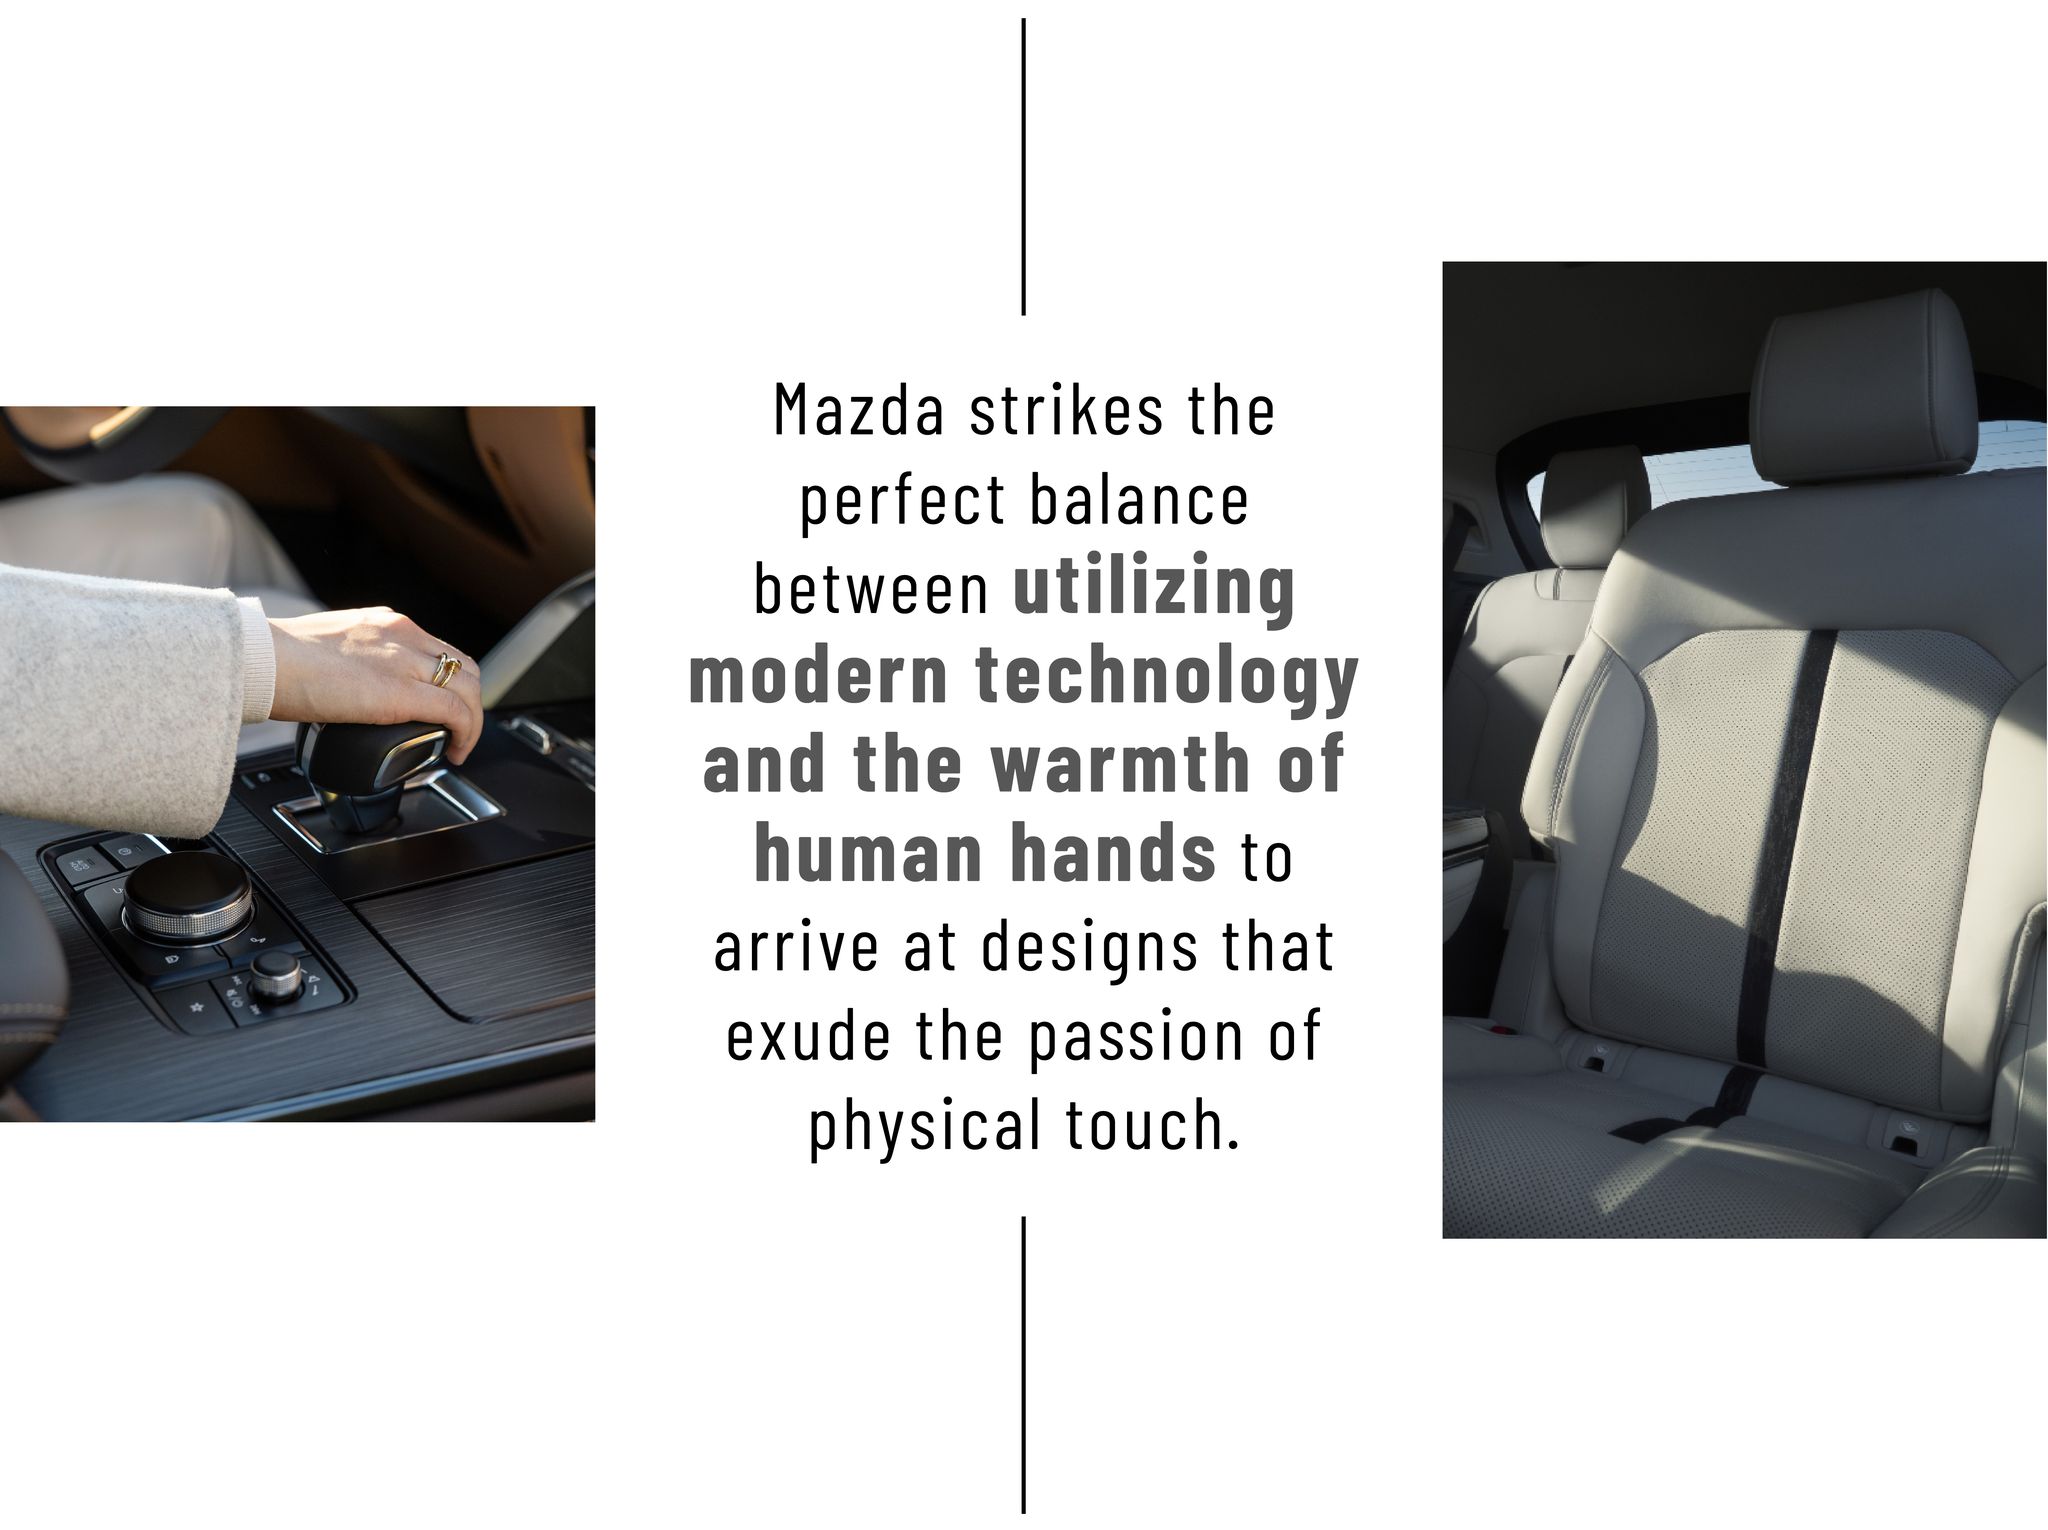 mazda strikes the perfect balance between utilizing modern technology and the warmth of human hands to arrive at designs that exude the passion of physical touch